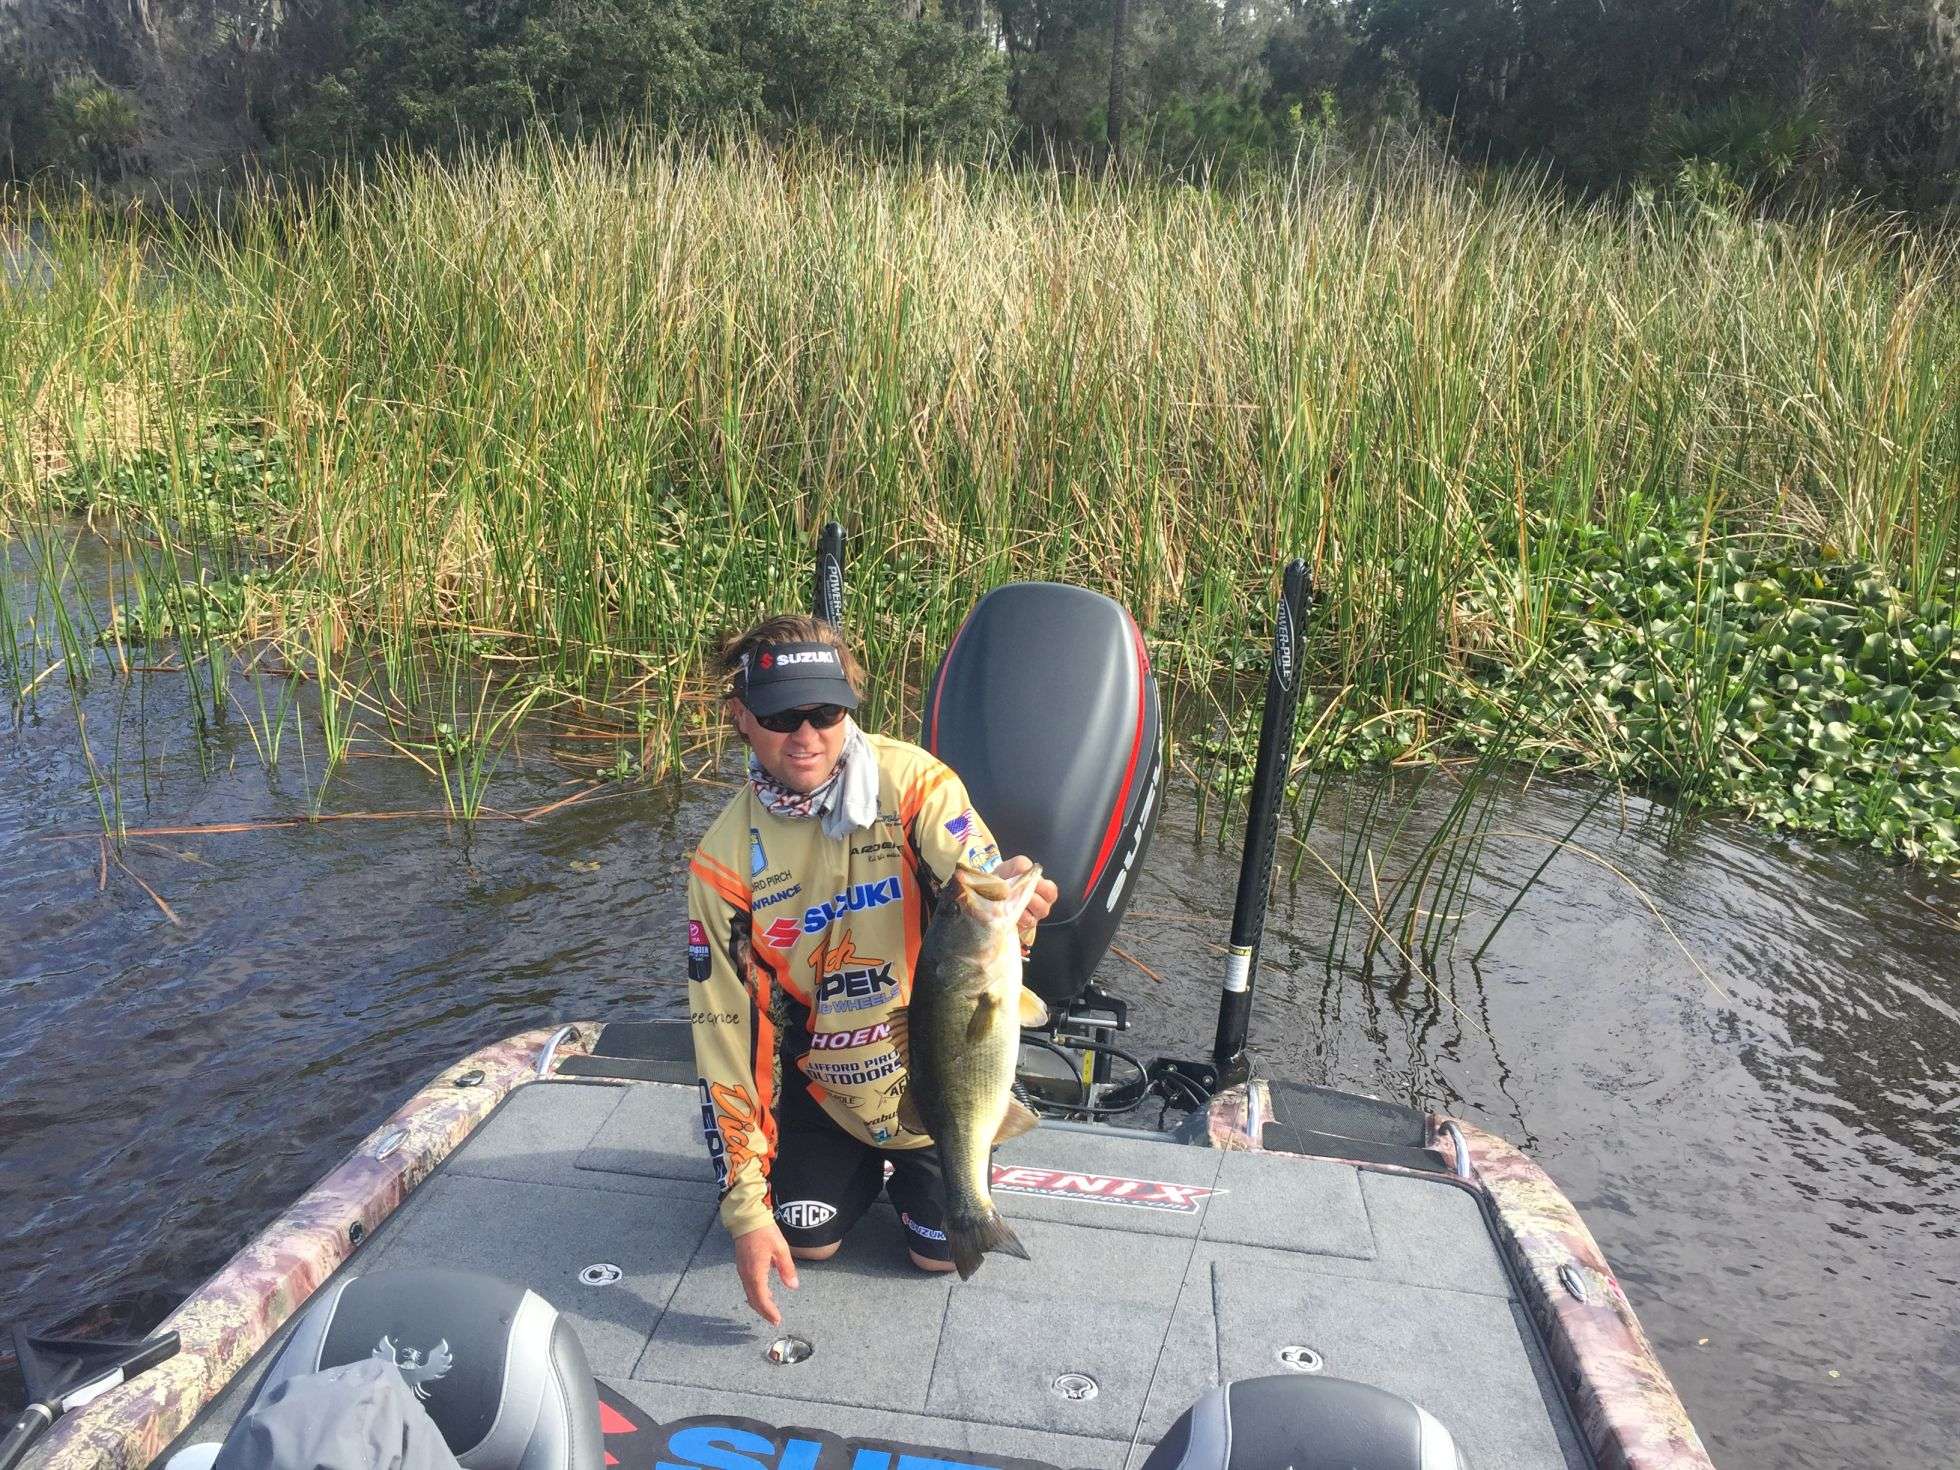 Cliff Pirch is definitely in an area that has them as heâs landed another solid fish. 